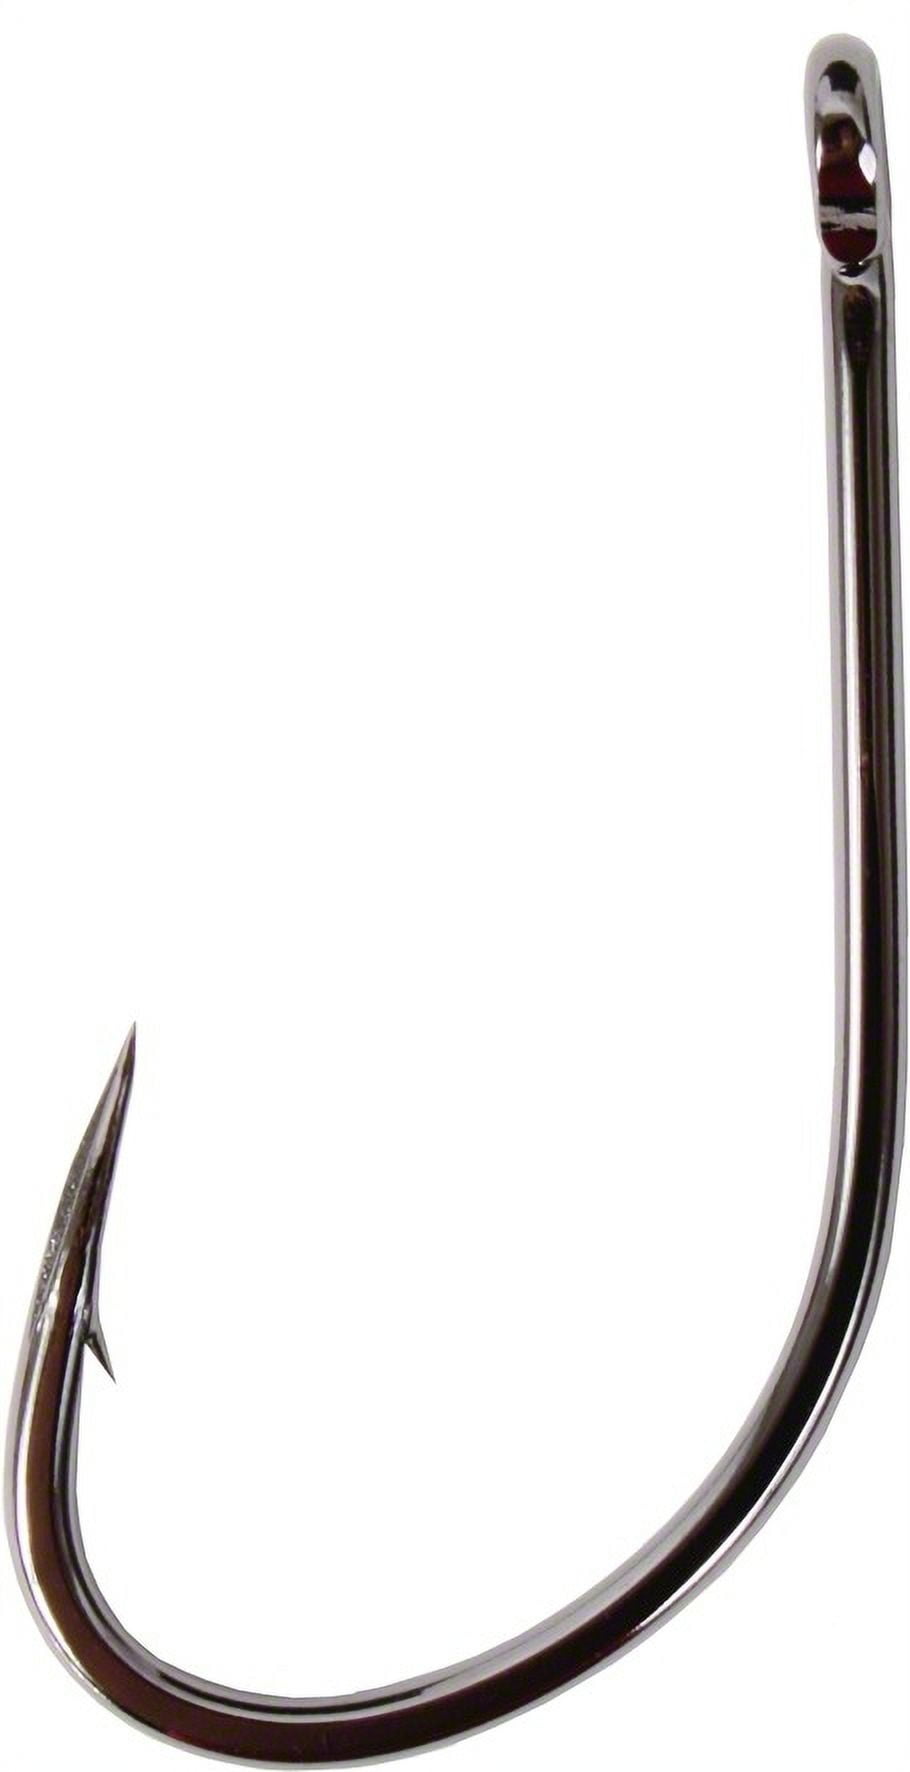 Owner 5170-121 AKI Bait Hook with Cutting Point Size 2/0 Forged 